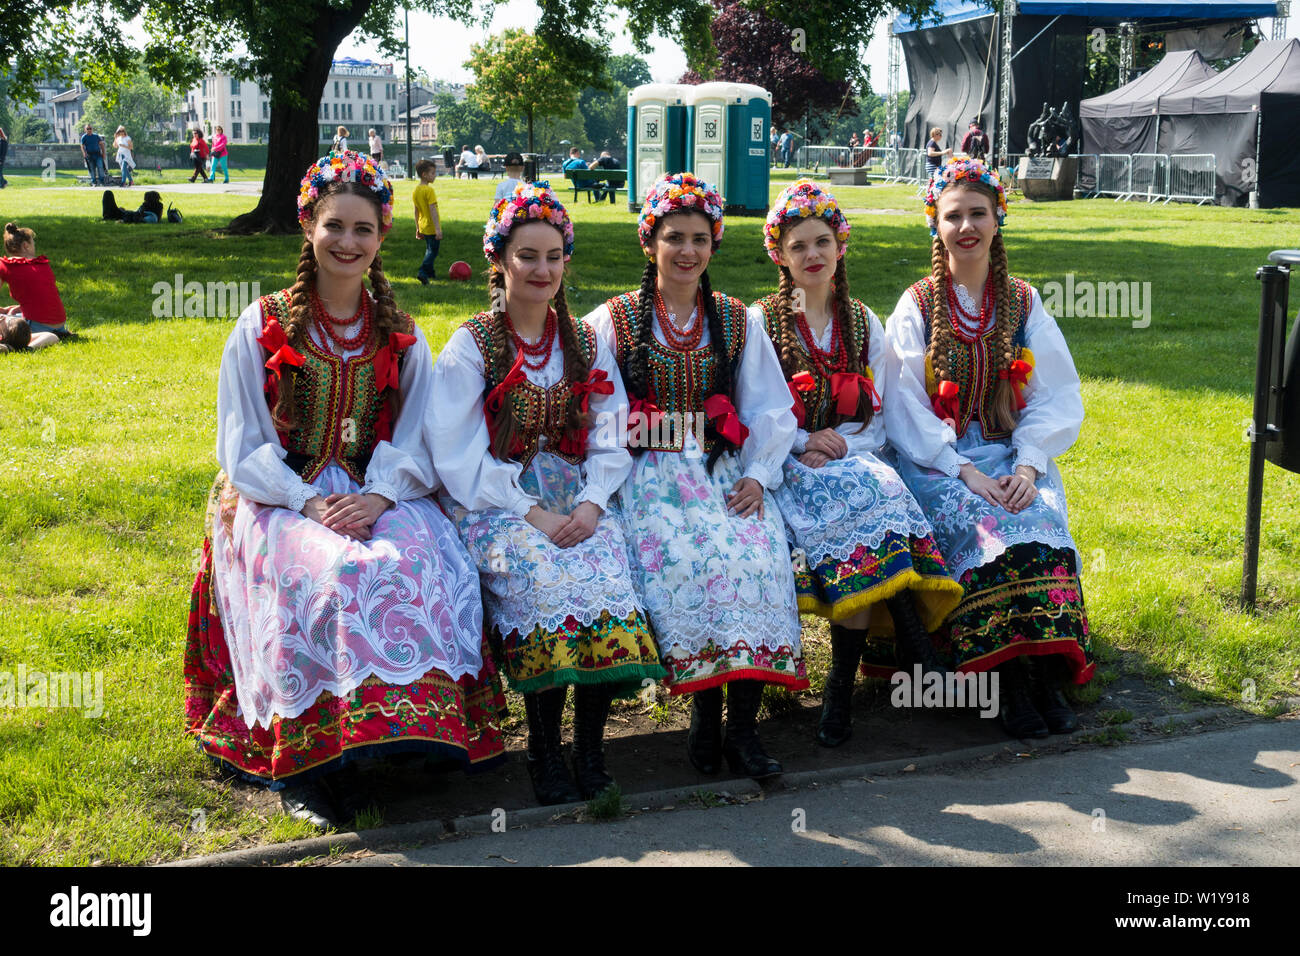 A Group of Polish Girls in Traditional Dress, Krakow, Poland, Europe. Stock Photo